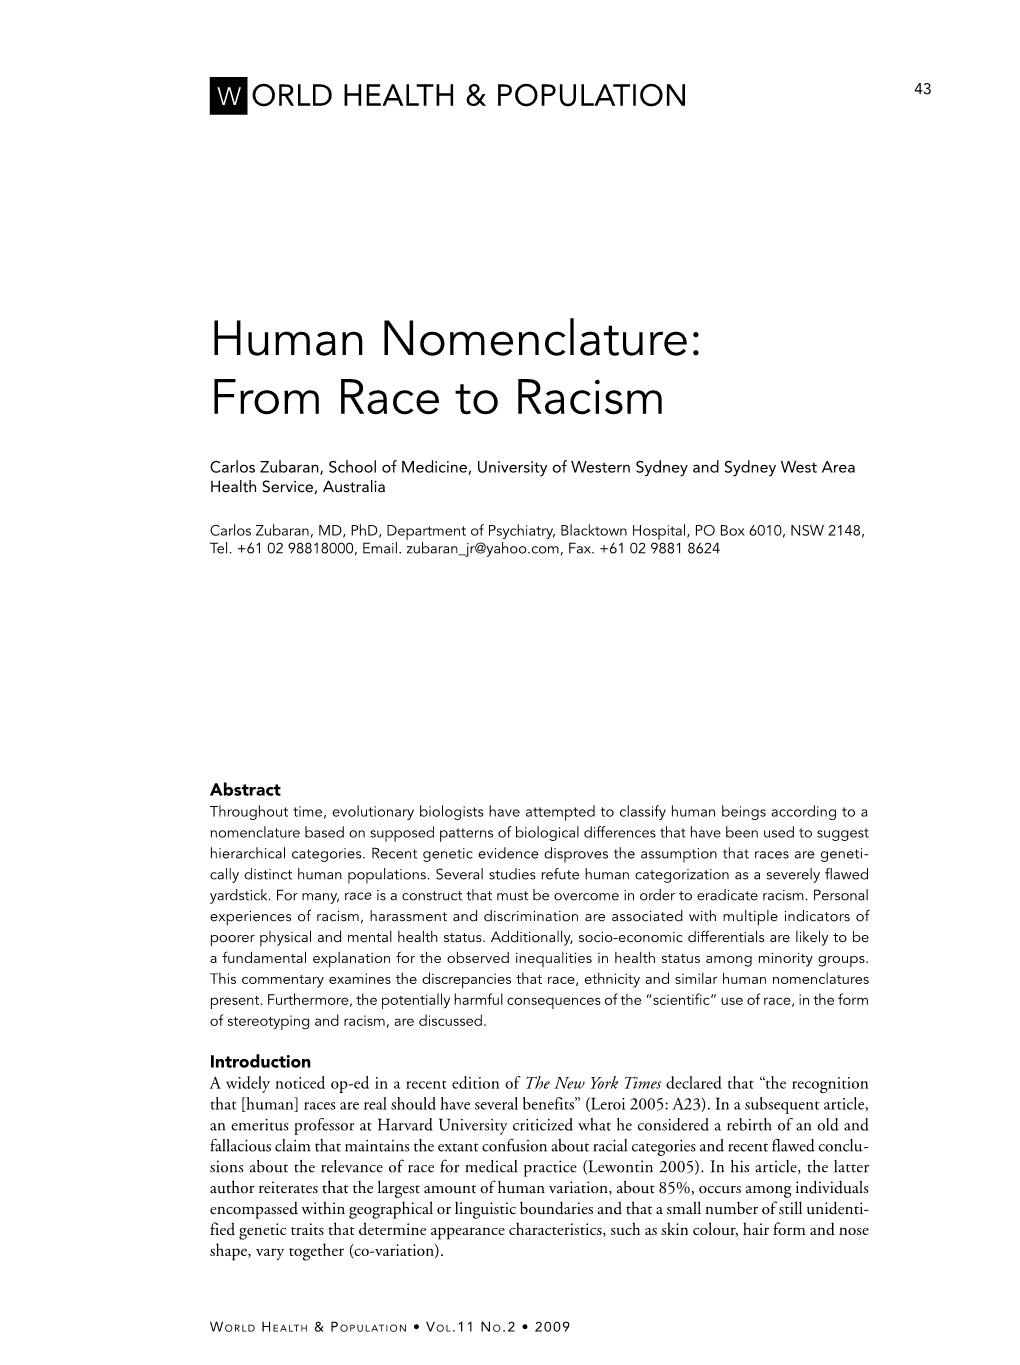 Human Nomenclature: from Race to Racism